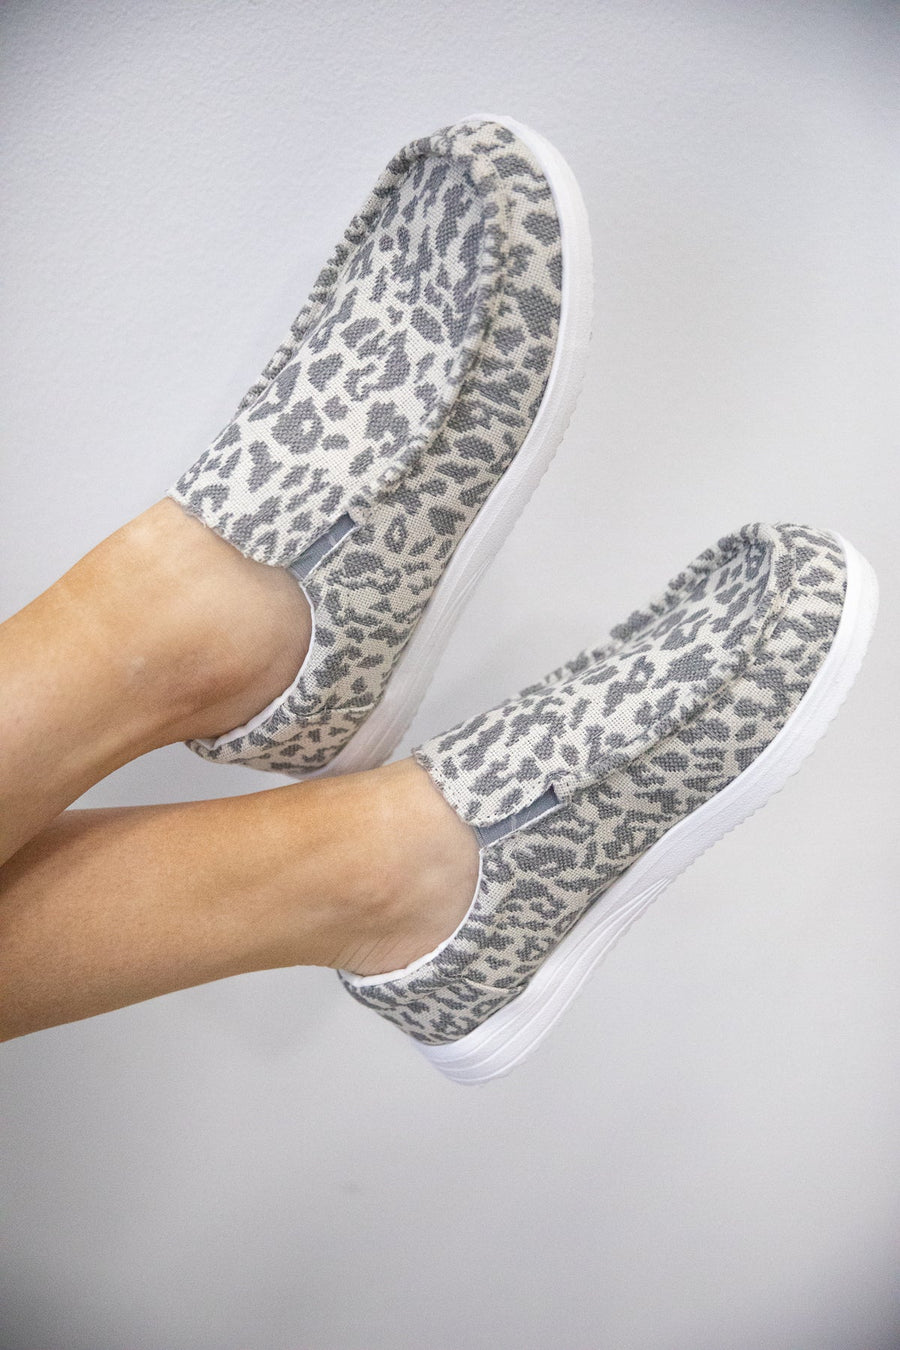 Shop Stylish Shoes on Sale | View the Collection at Filly Flair · Filly ...